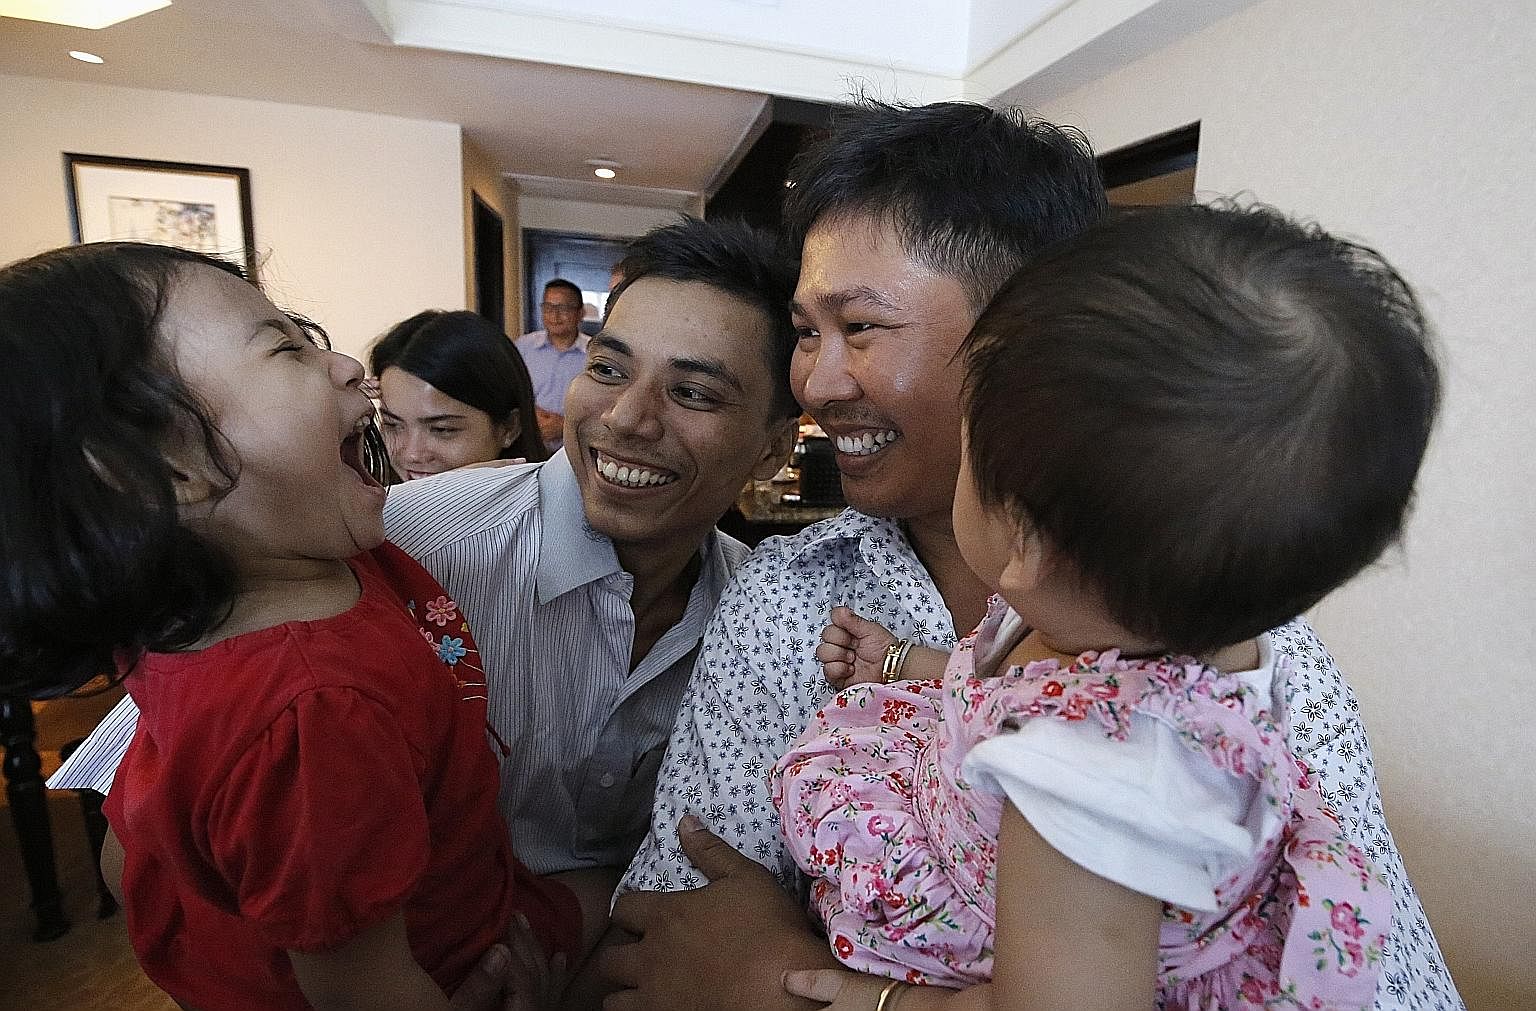 Myanmar journalists Kyaw Soe Oo (left) and Wa Lone, who were jailed over their coverage of the Rohingya crisis, celebrating with their daughters after they were freed in a presidential amnesty in Yangon yesterday. The award-winning Reuters journalist